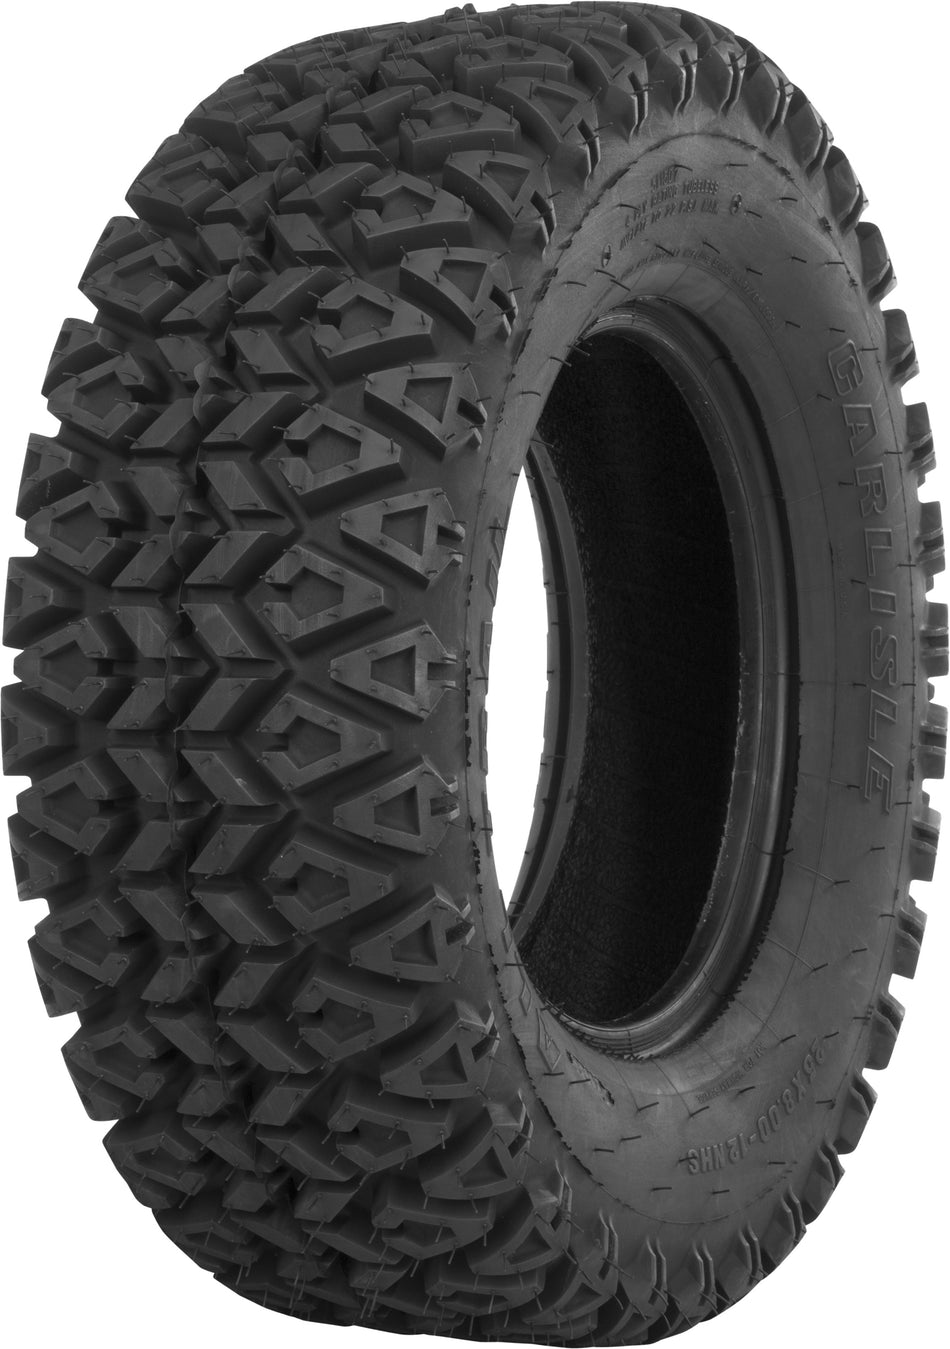 ITP Tire 'all 'trail 'front 23x8-12 'bias 511506~OLD